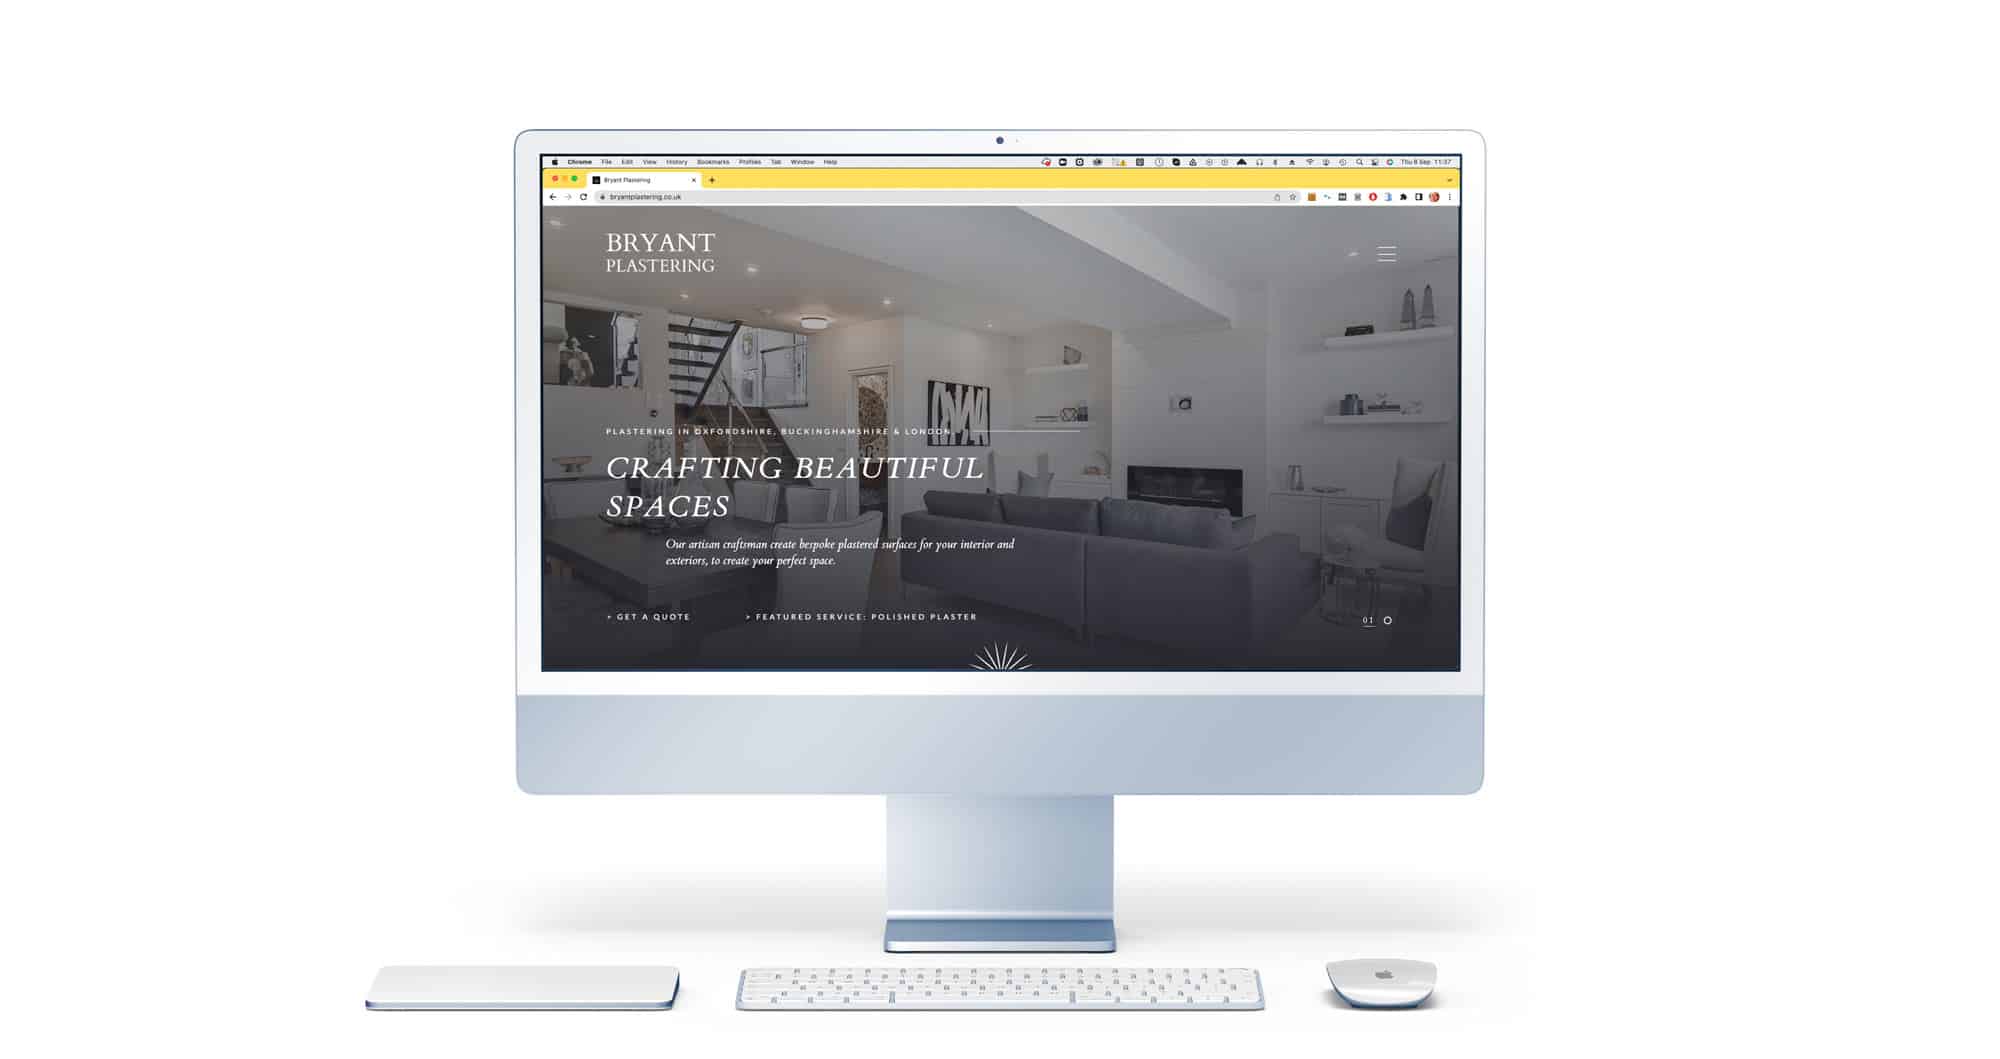 The Bryant Plastering website displayed on an iMac